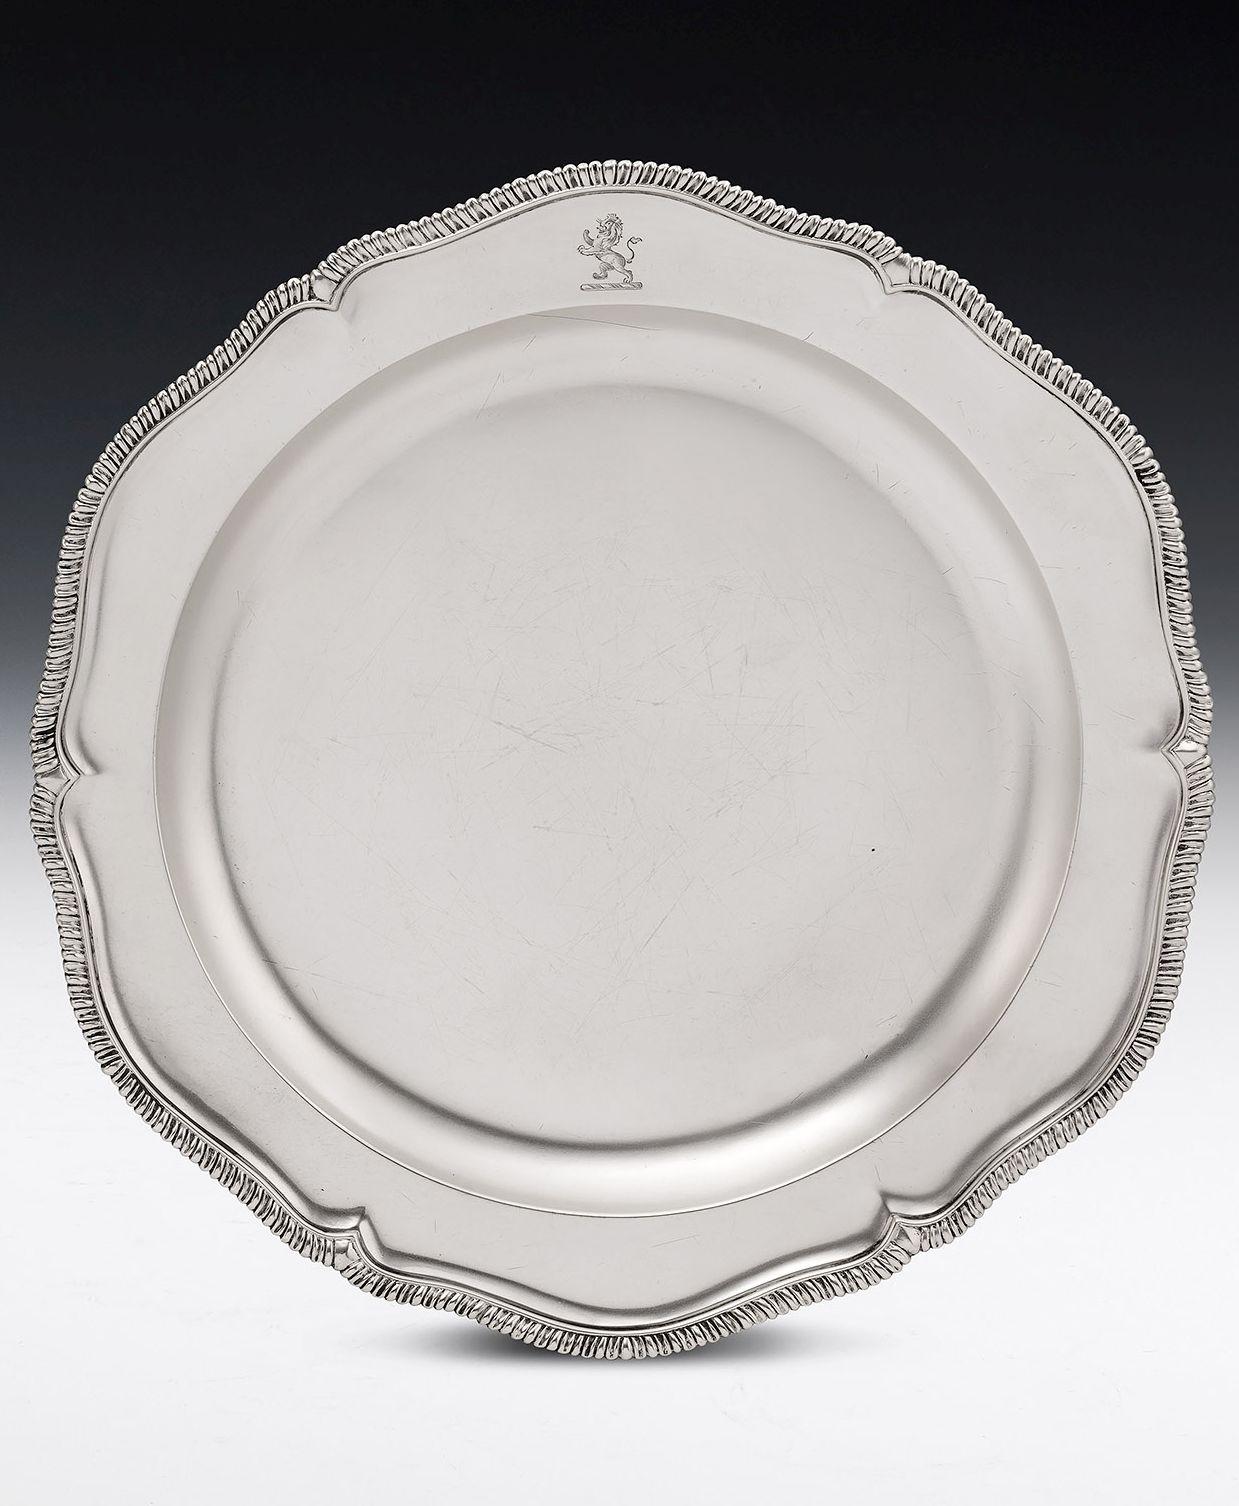 This rare pair of early George III sideboard dishes come from the workshops of the Royal silversmith, Thomas Heming, and were made in London in 1763. The Dishes are circular in form with a shaped rim decorated with gadrooning. The bowl rises up to a